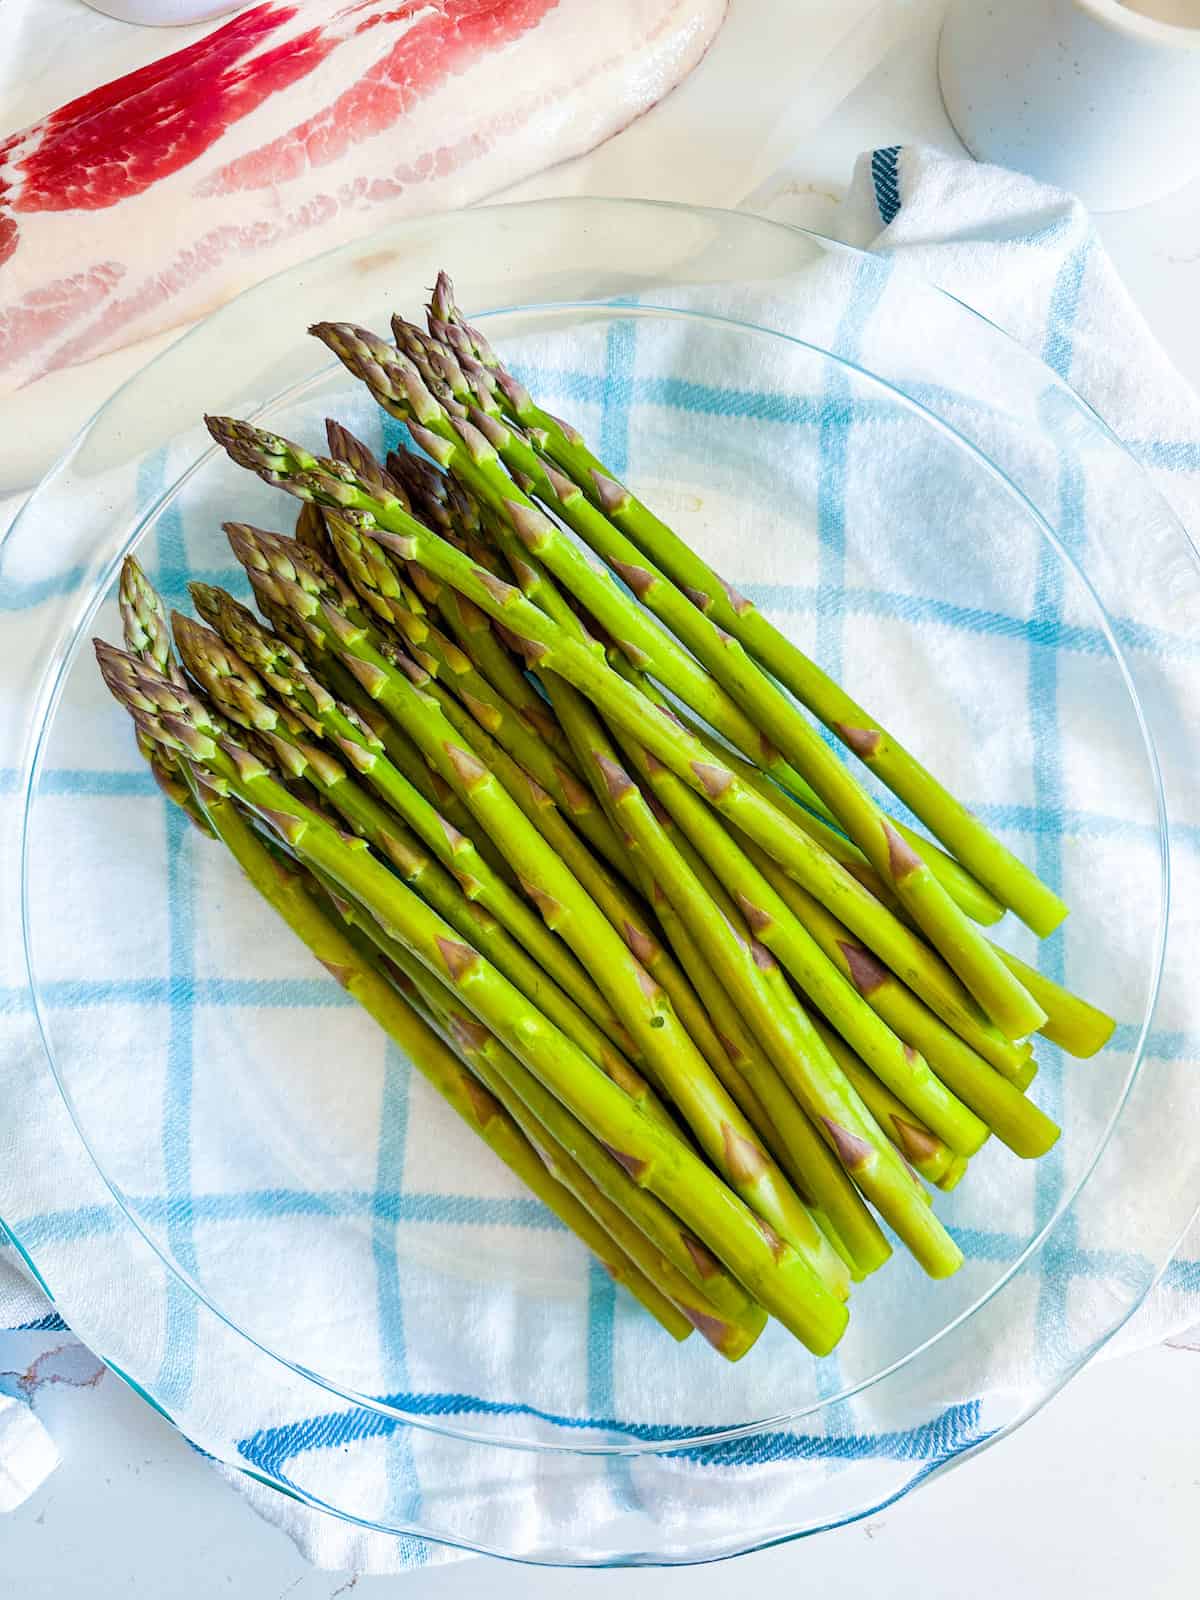 A bundle of washed and dried asparagus.